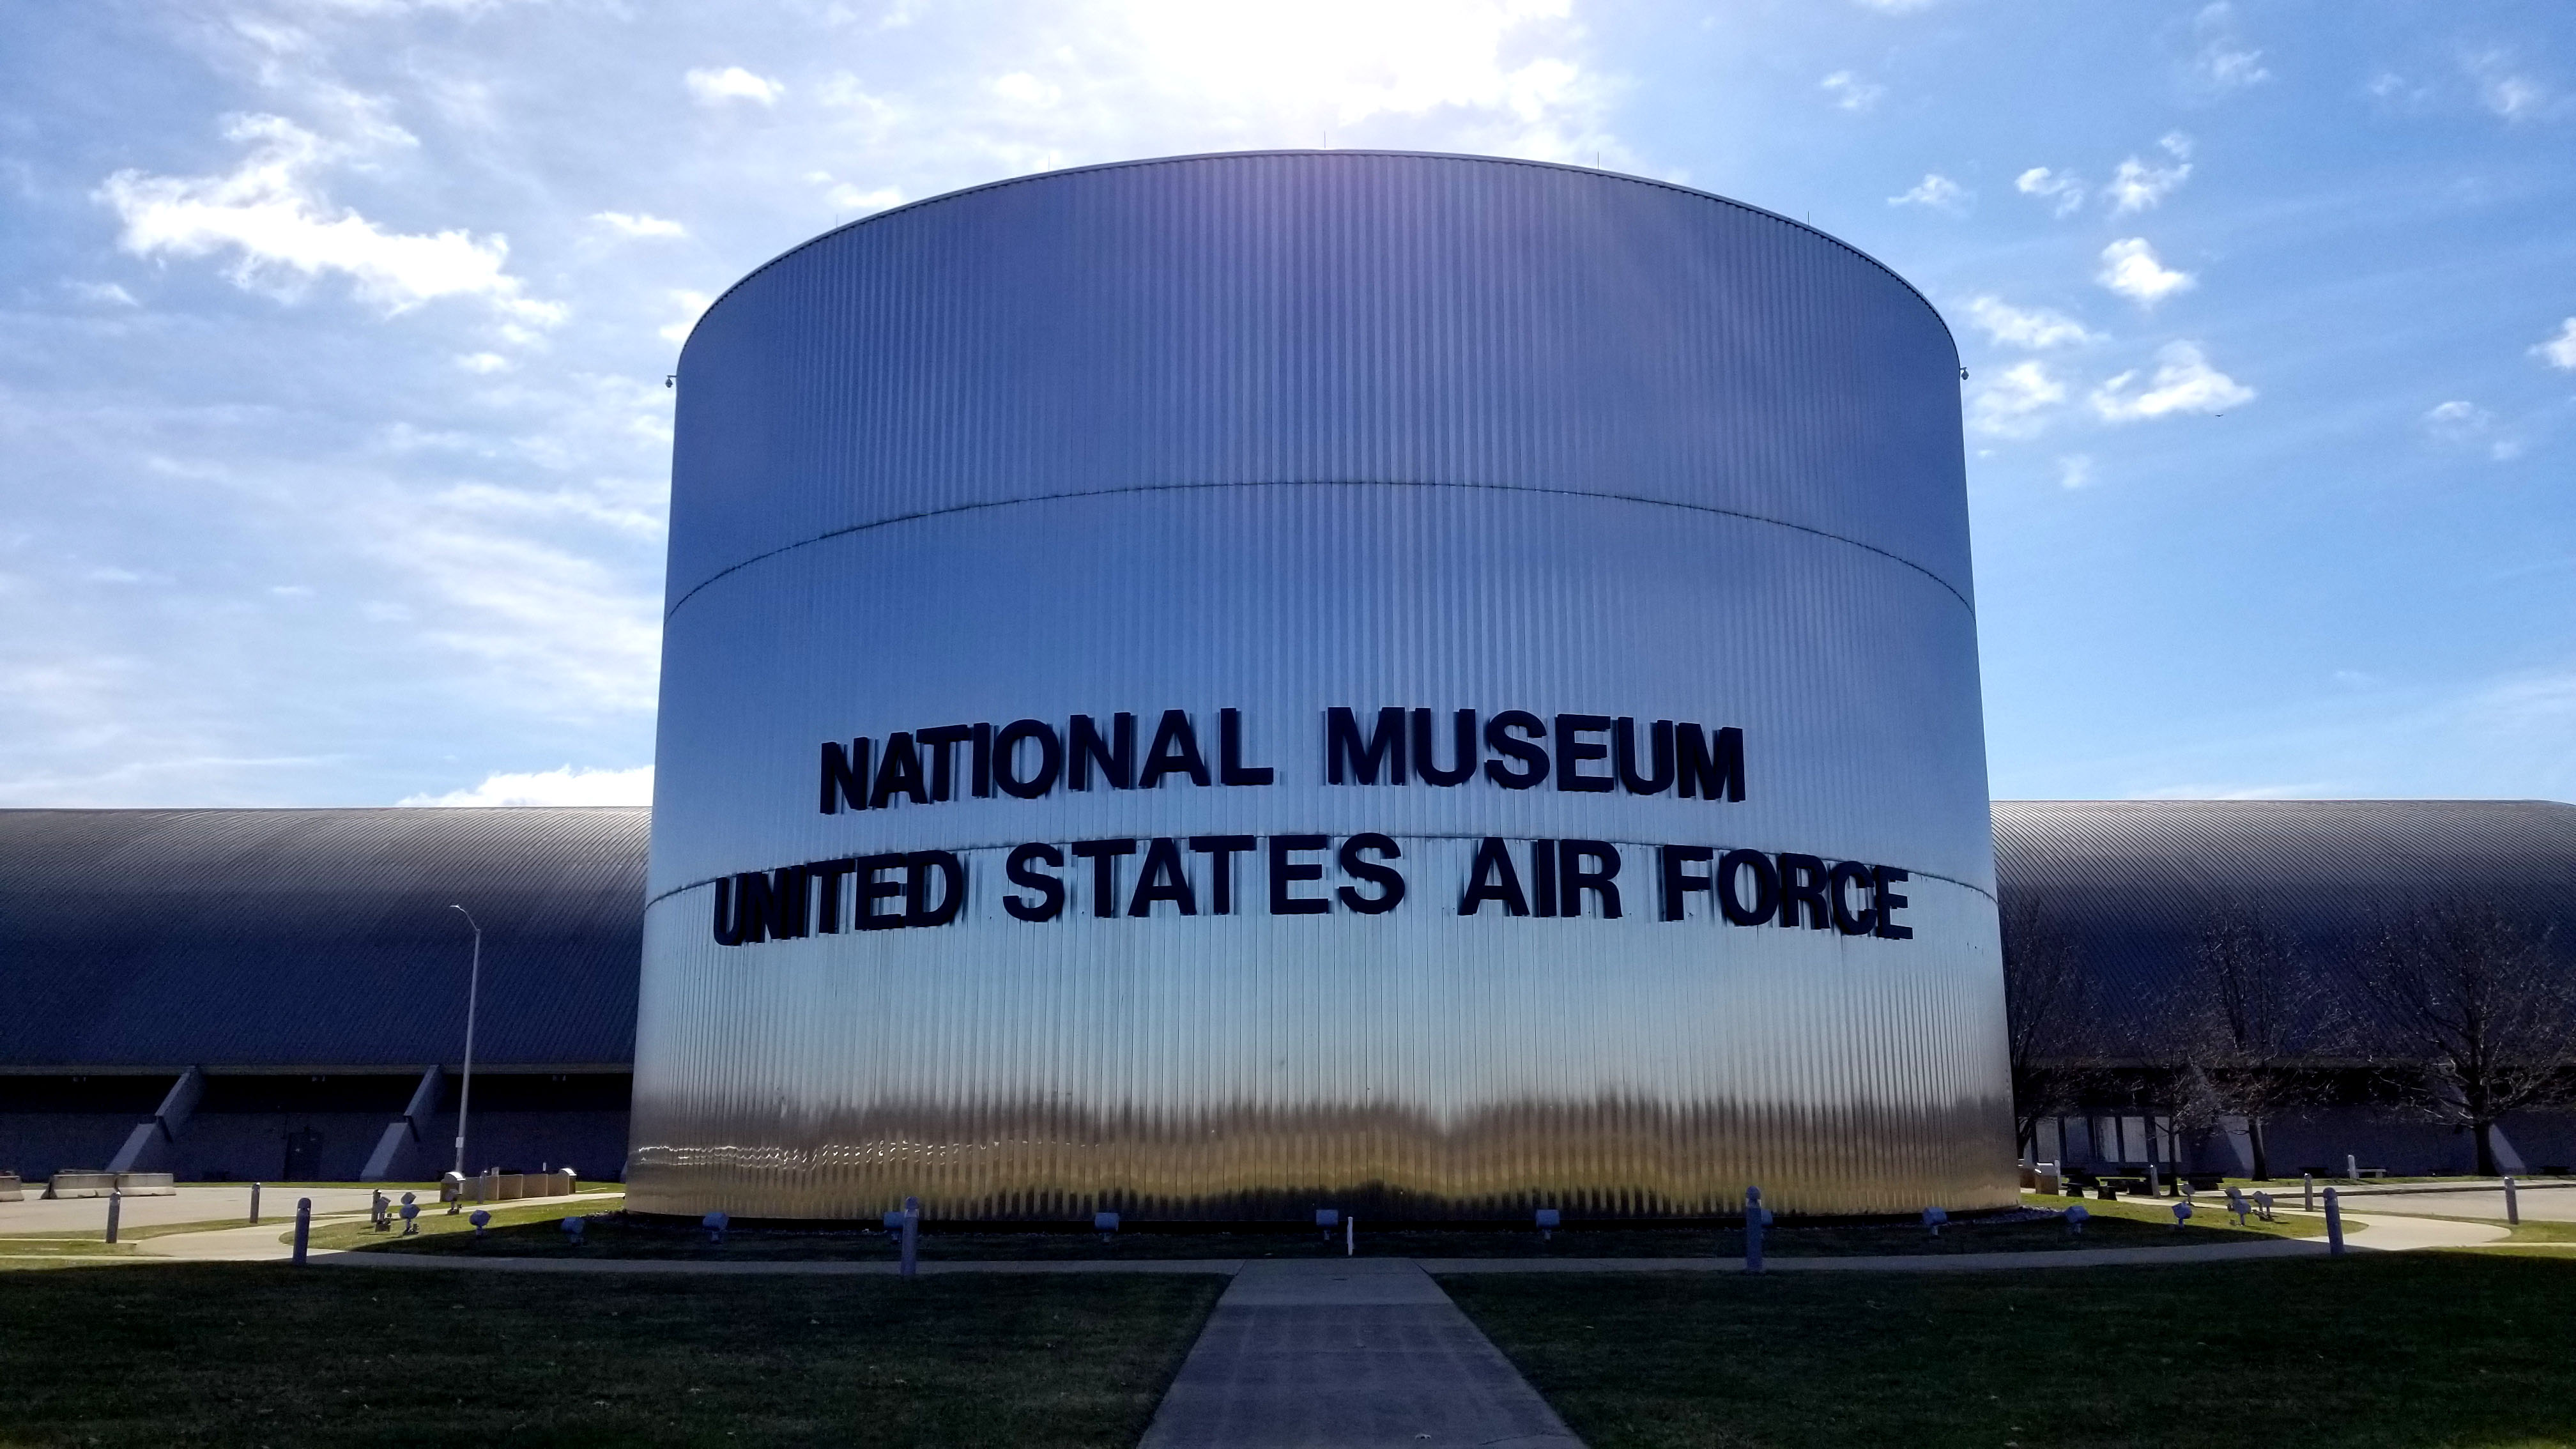 The National Museum of the United States Air Force